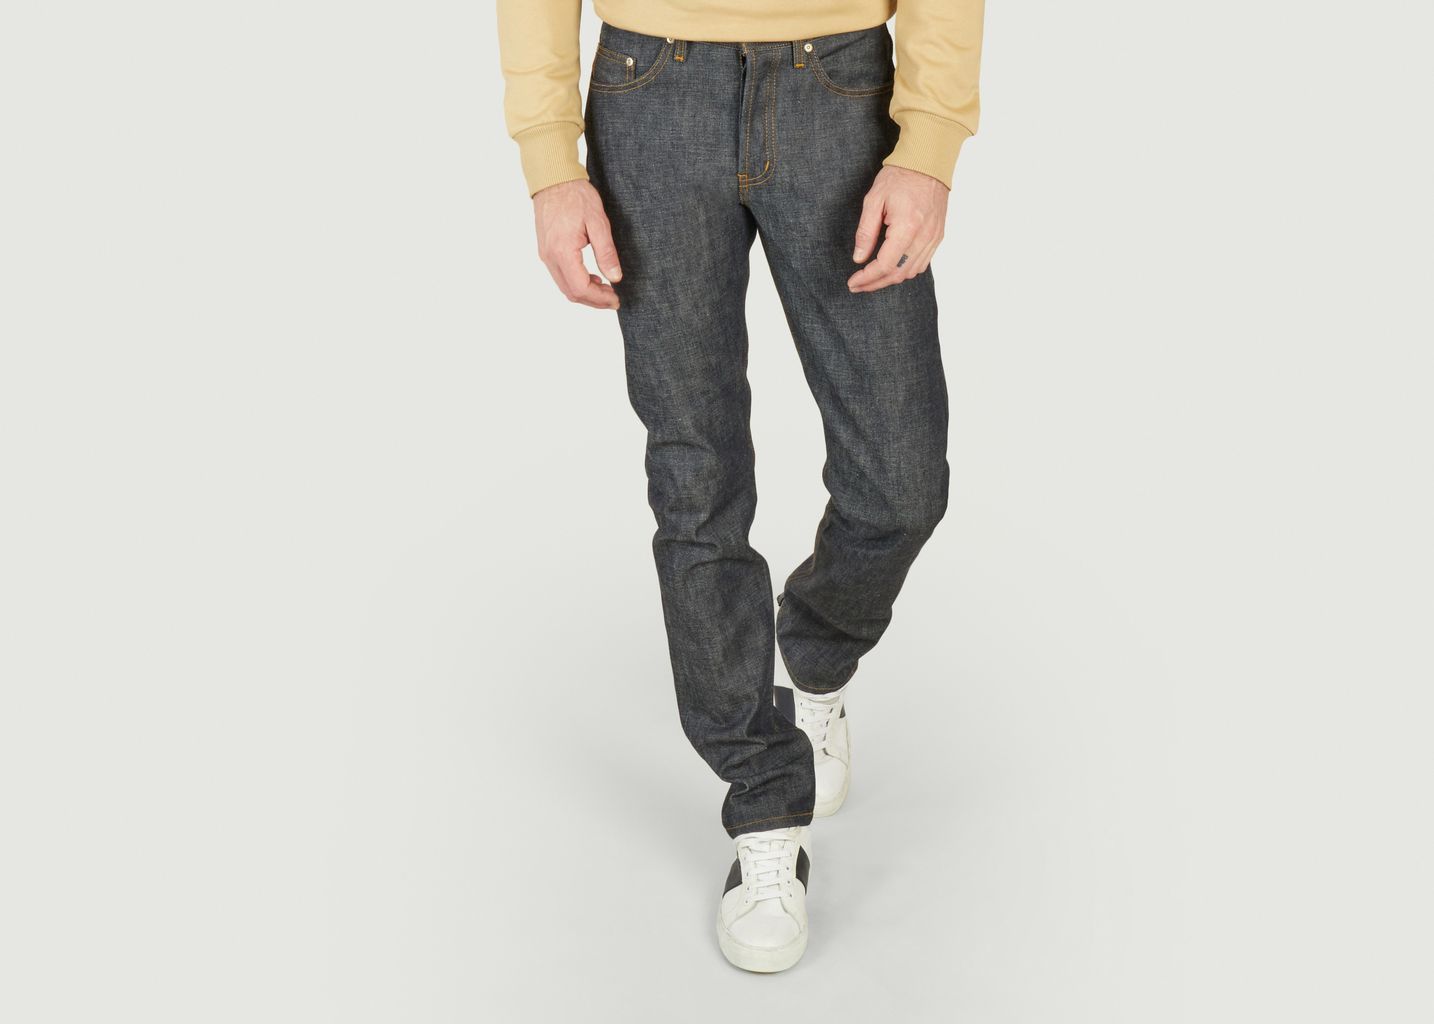 Jean Tried & True Selvedge Weird Guy - Naked and Famous